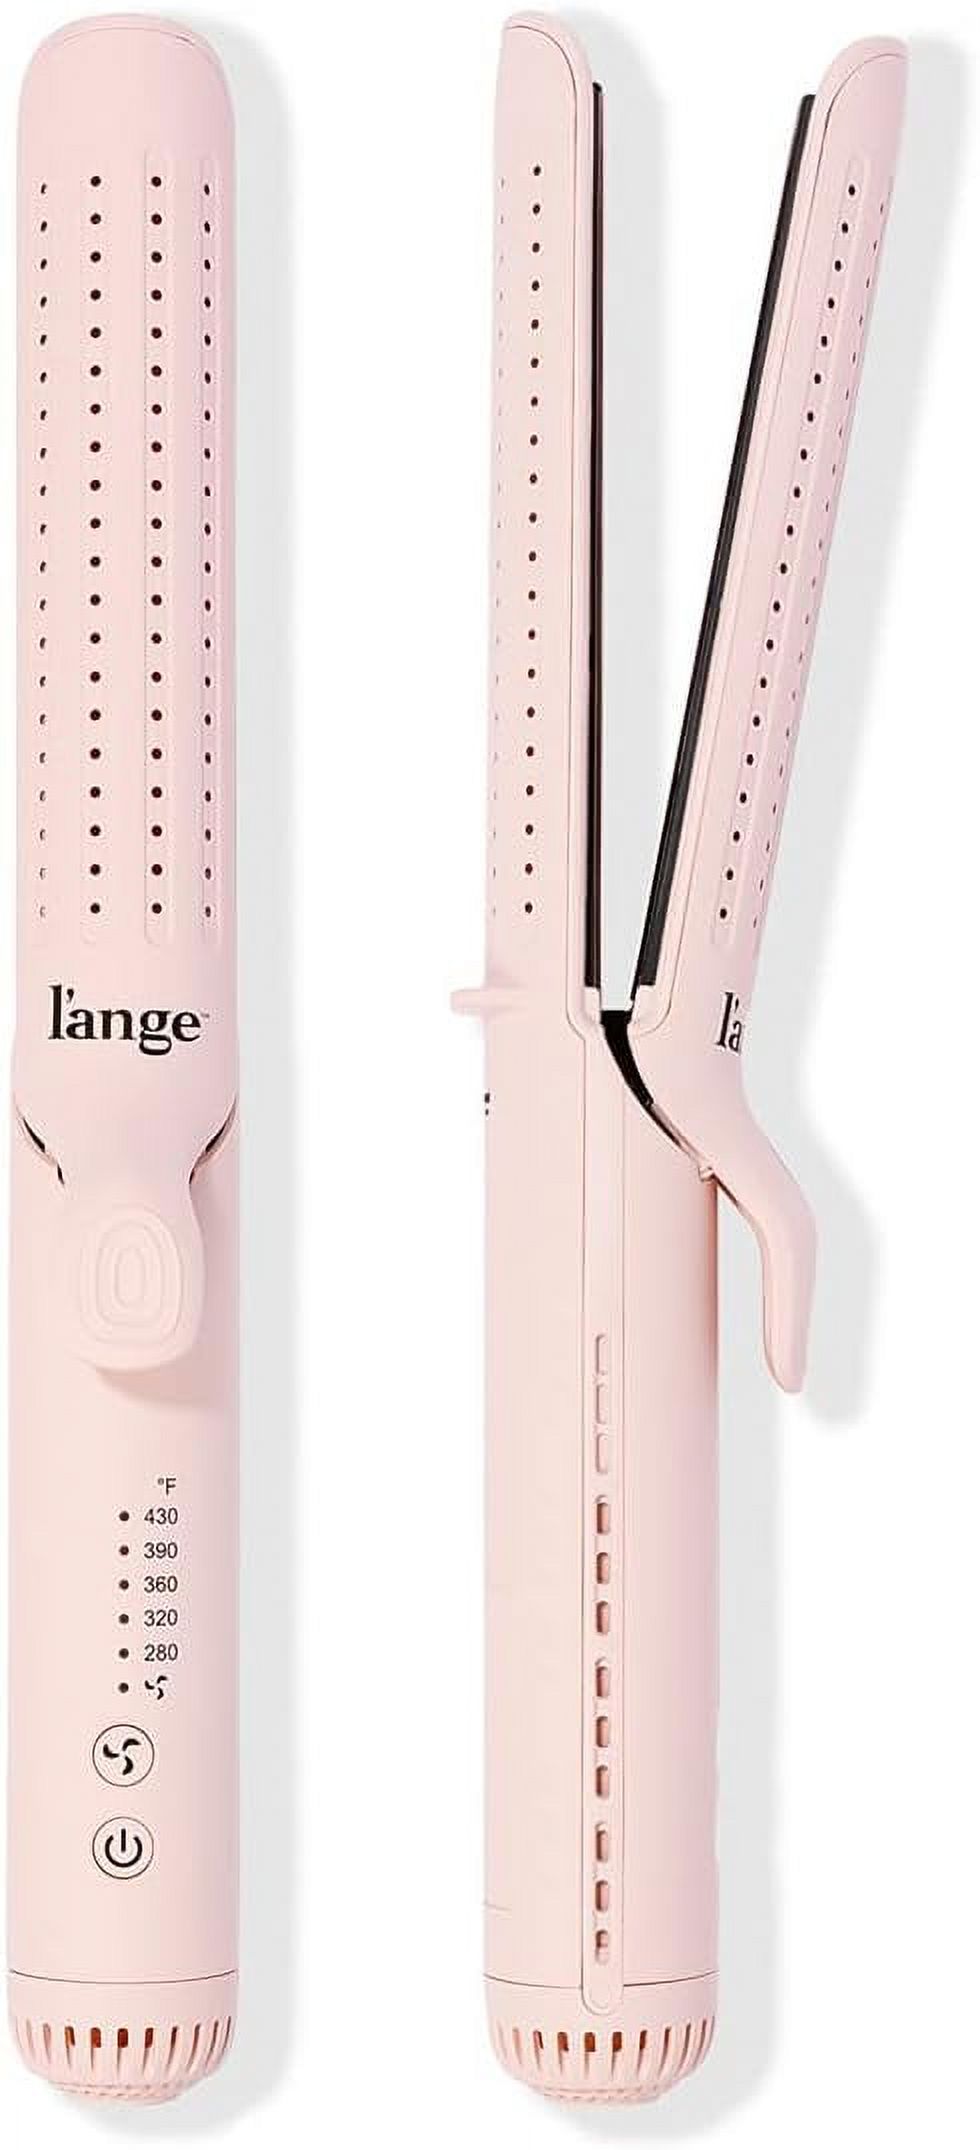 L'ange Hair Le Duo Grande 360° Airflow Styler | 2-in-1 Curling Wand & Titanium Flat Iron Hair Straightener - image 1 of 9